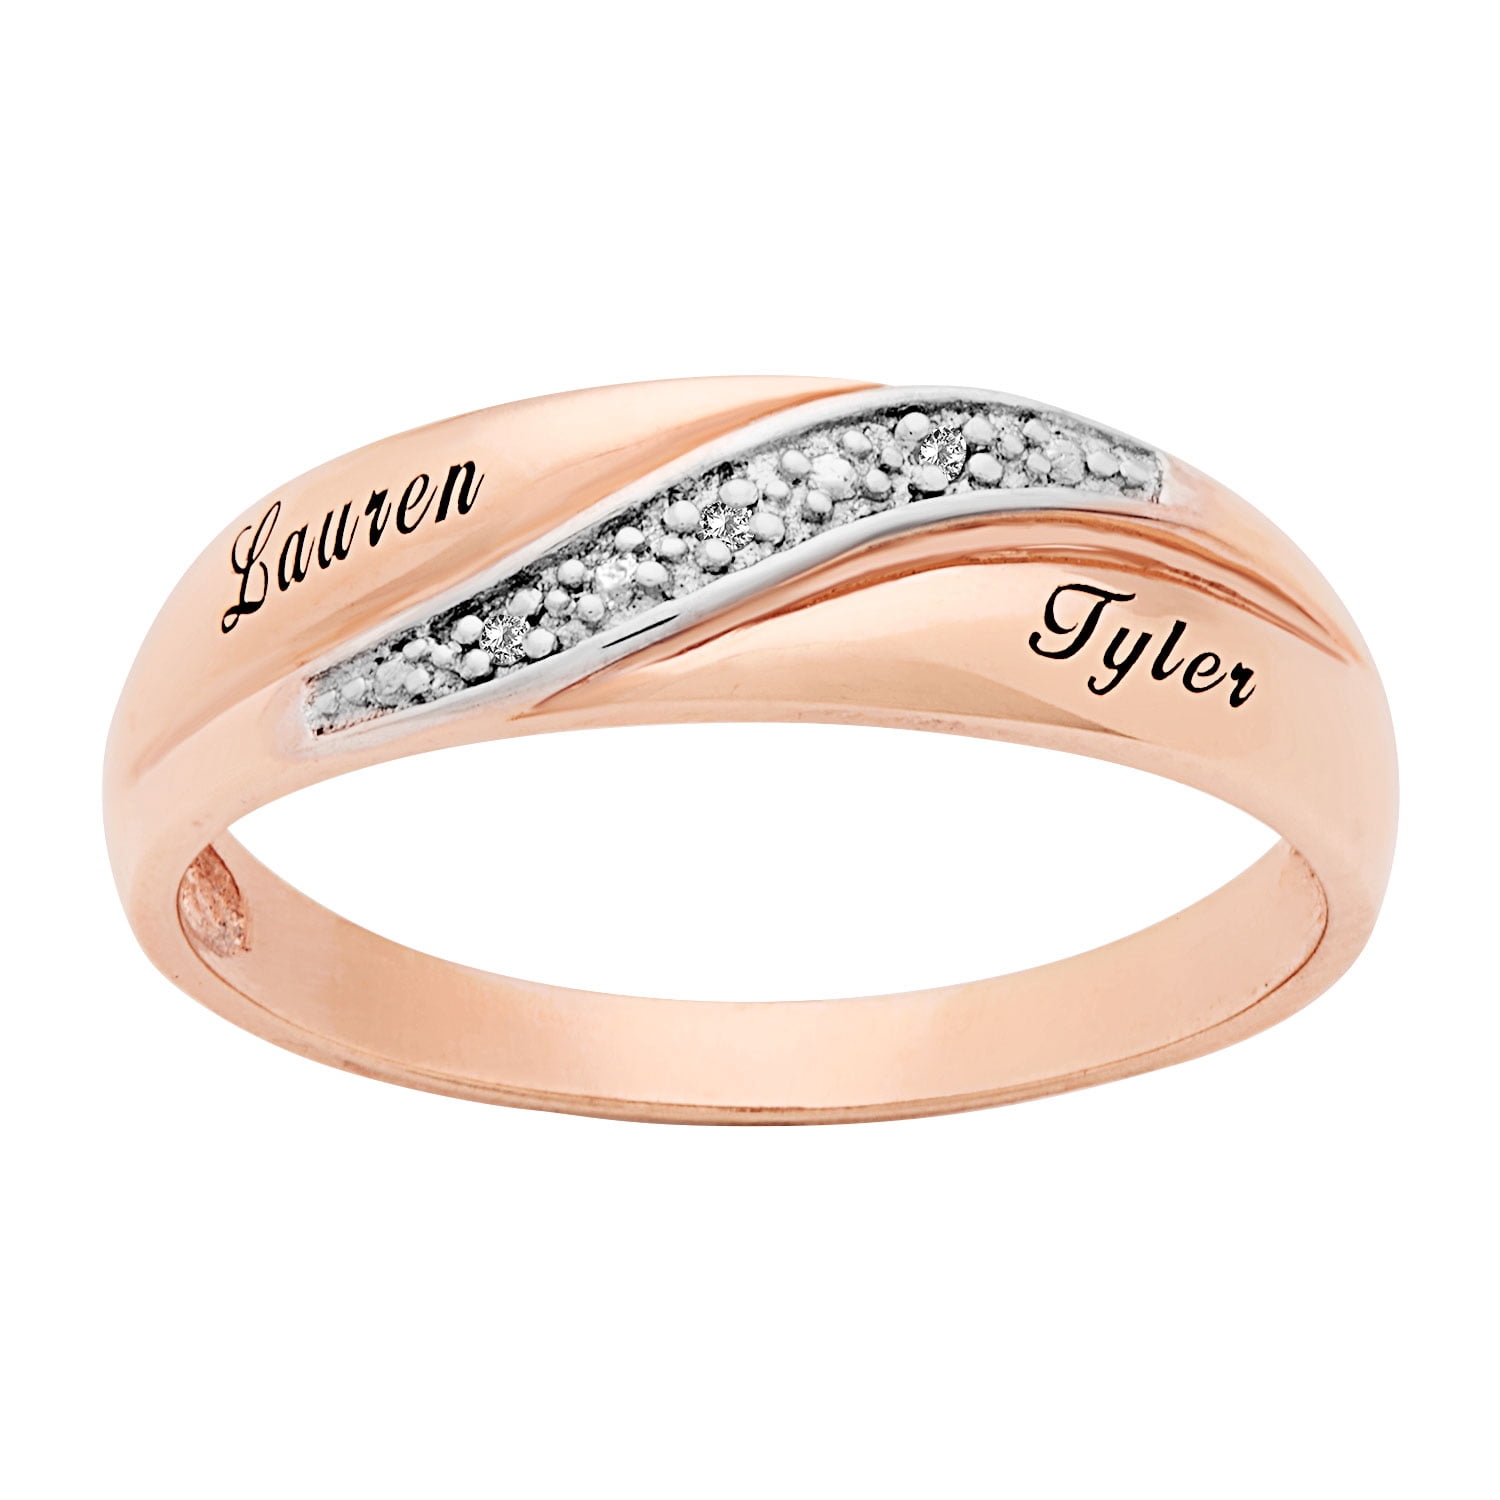 Personalized Wedding Rings